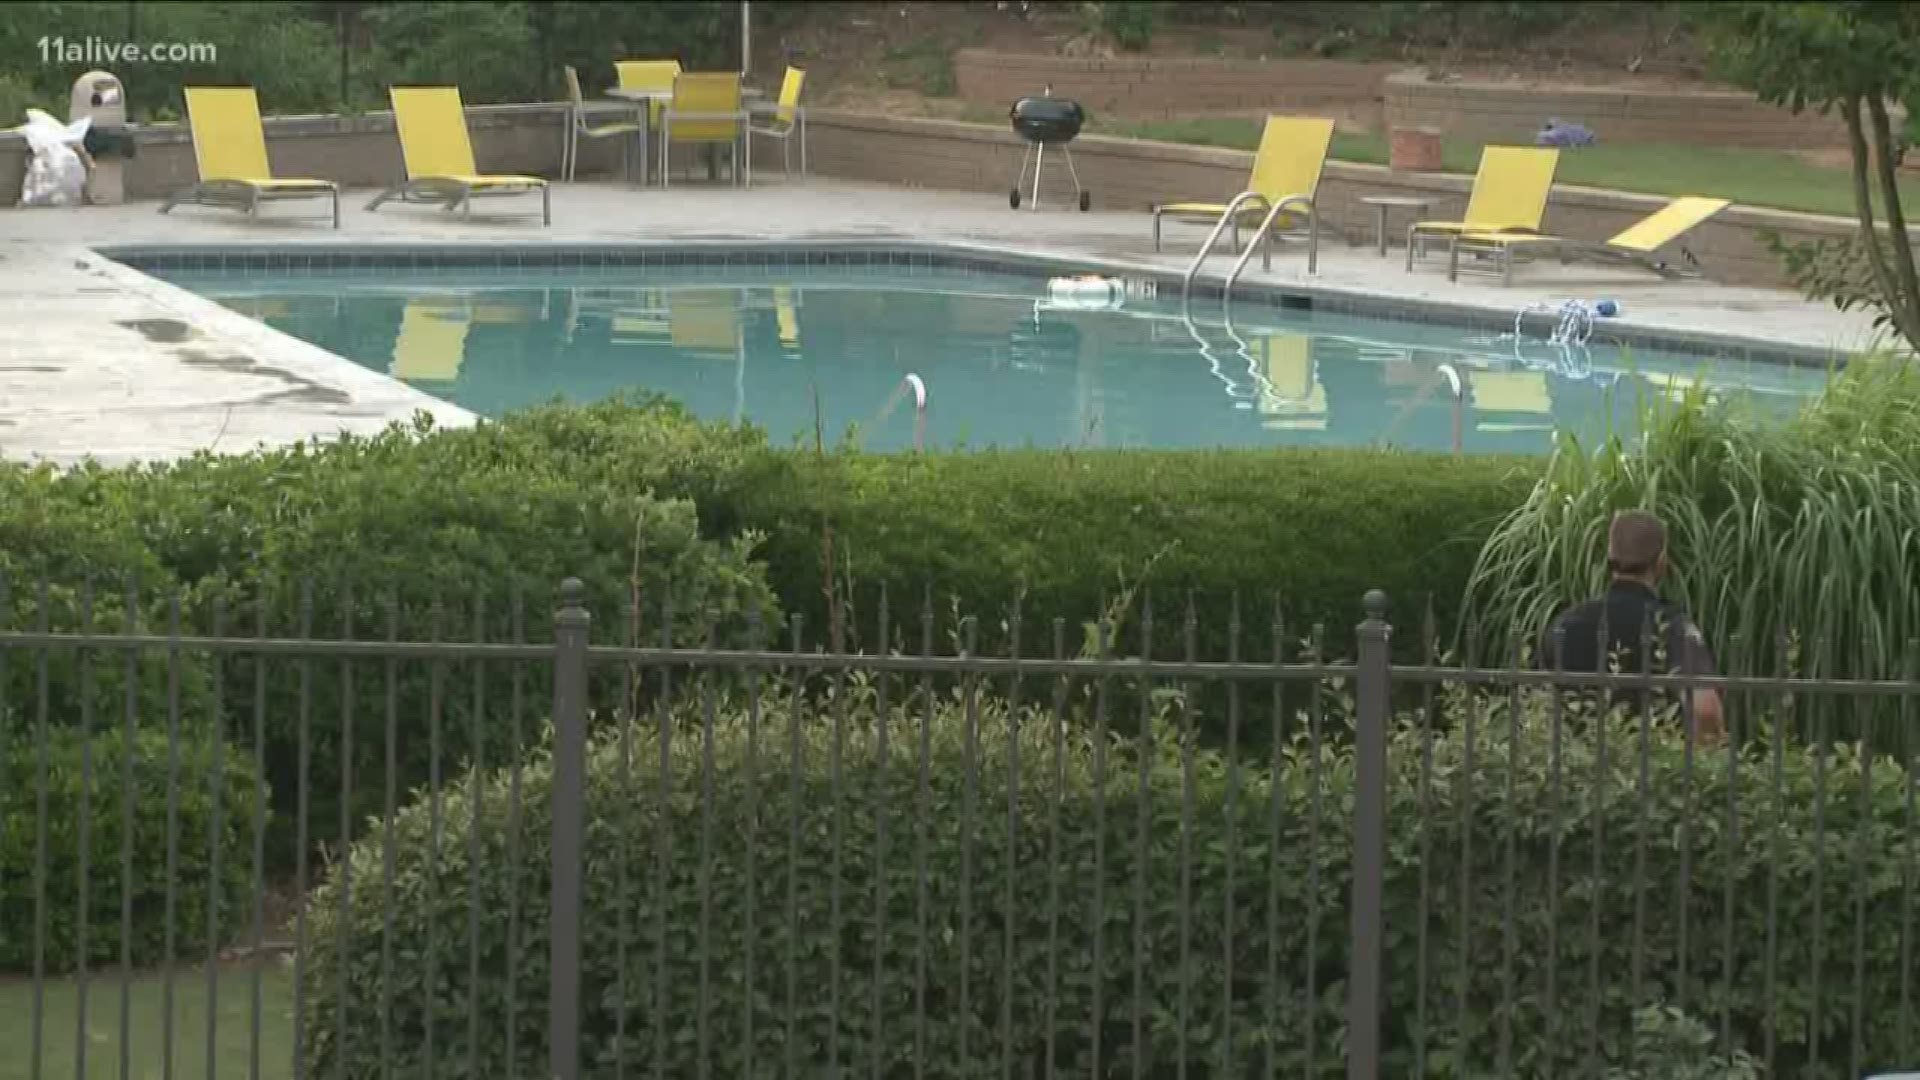 A witness said up to 400 people were at the party when the teen drowned.